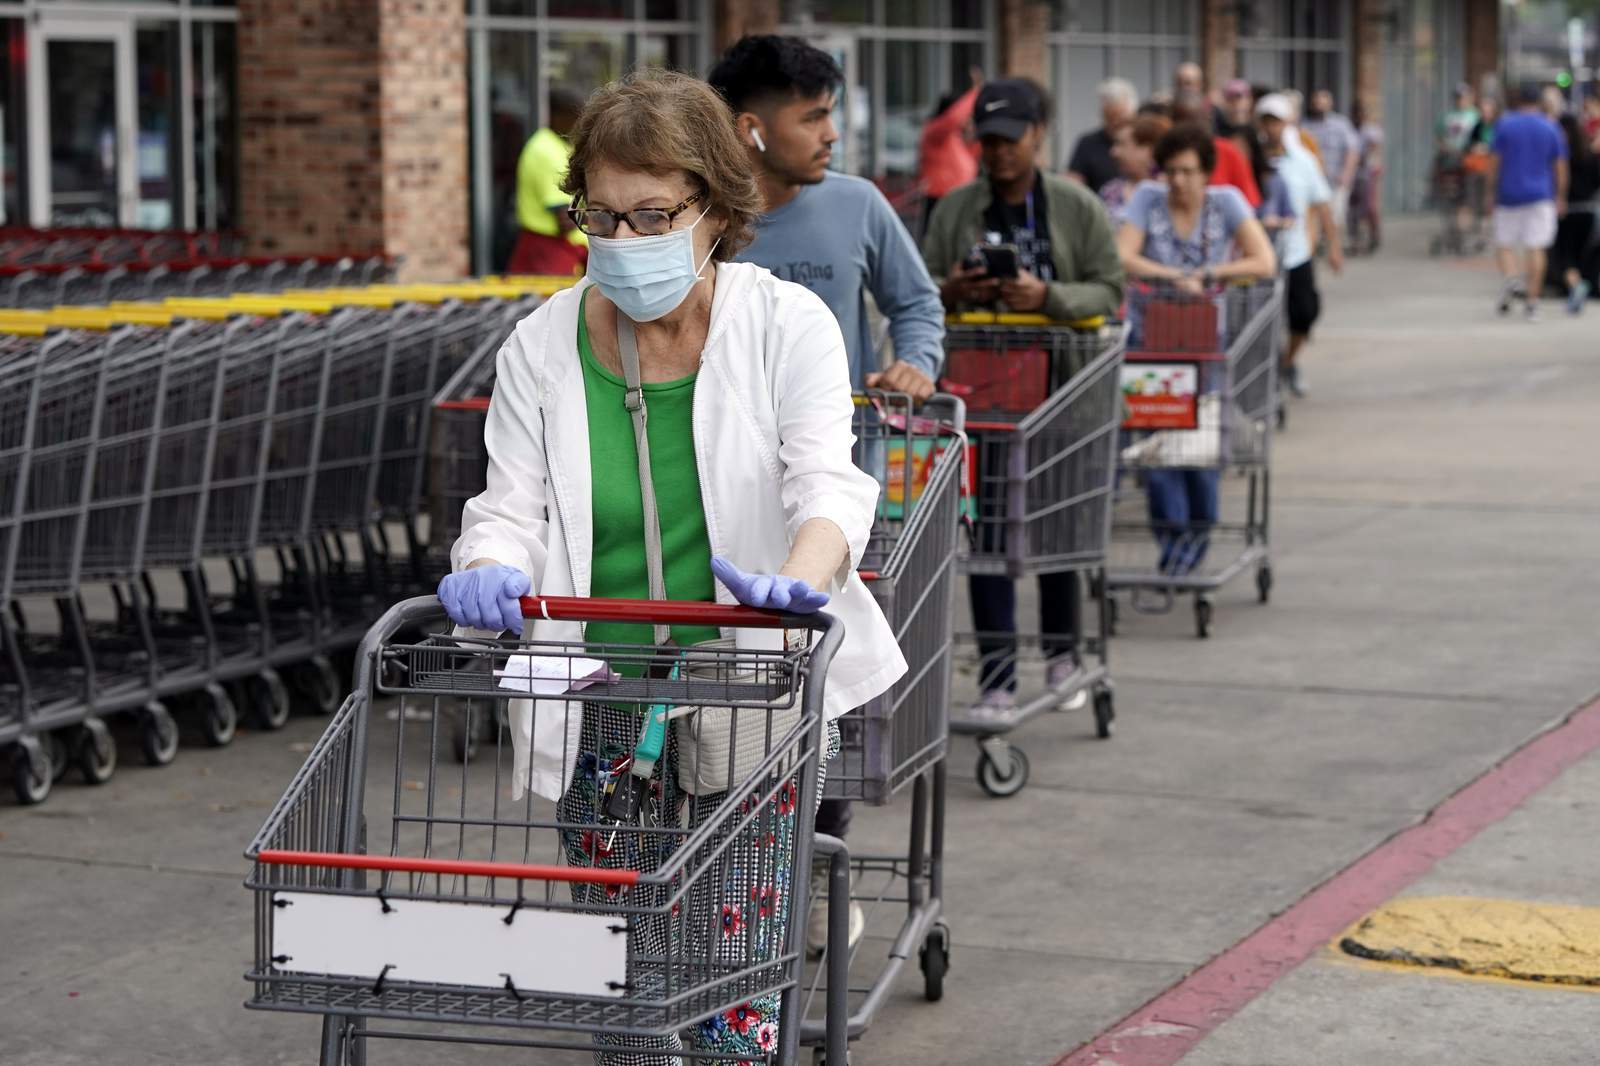 Starting Wednesday, you will have to wear a mask in H-E-B even if your county does not require it